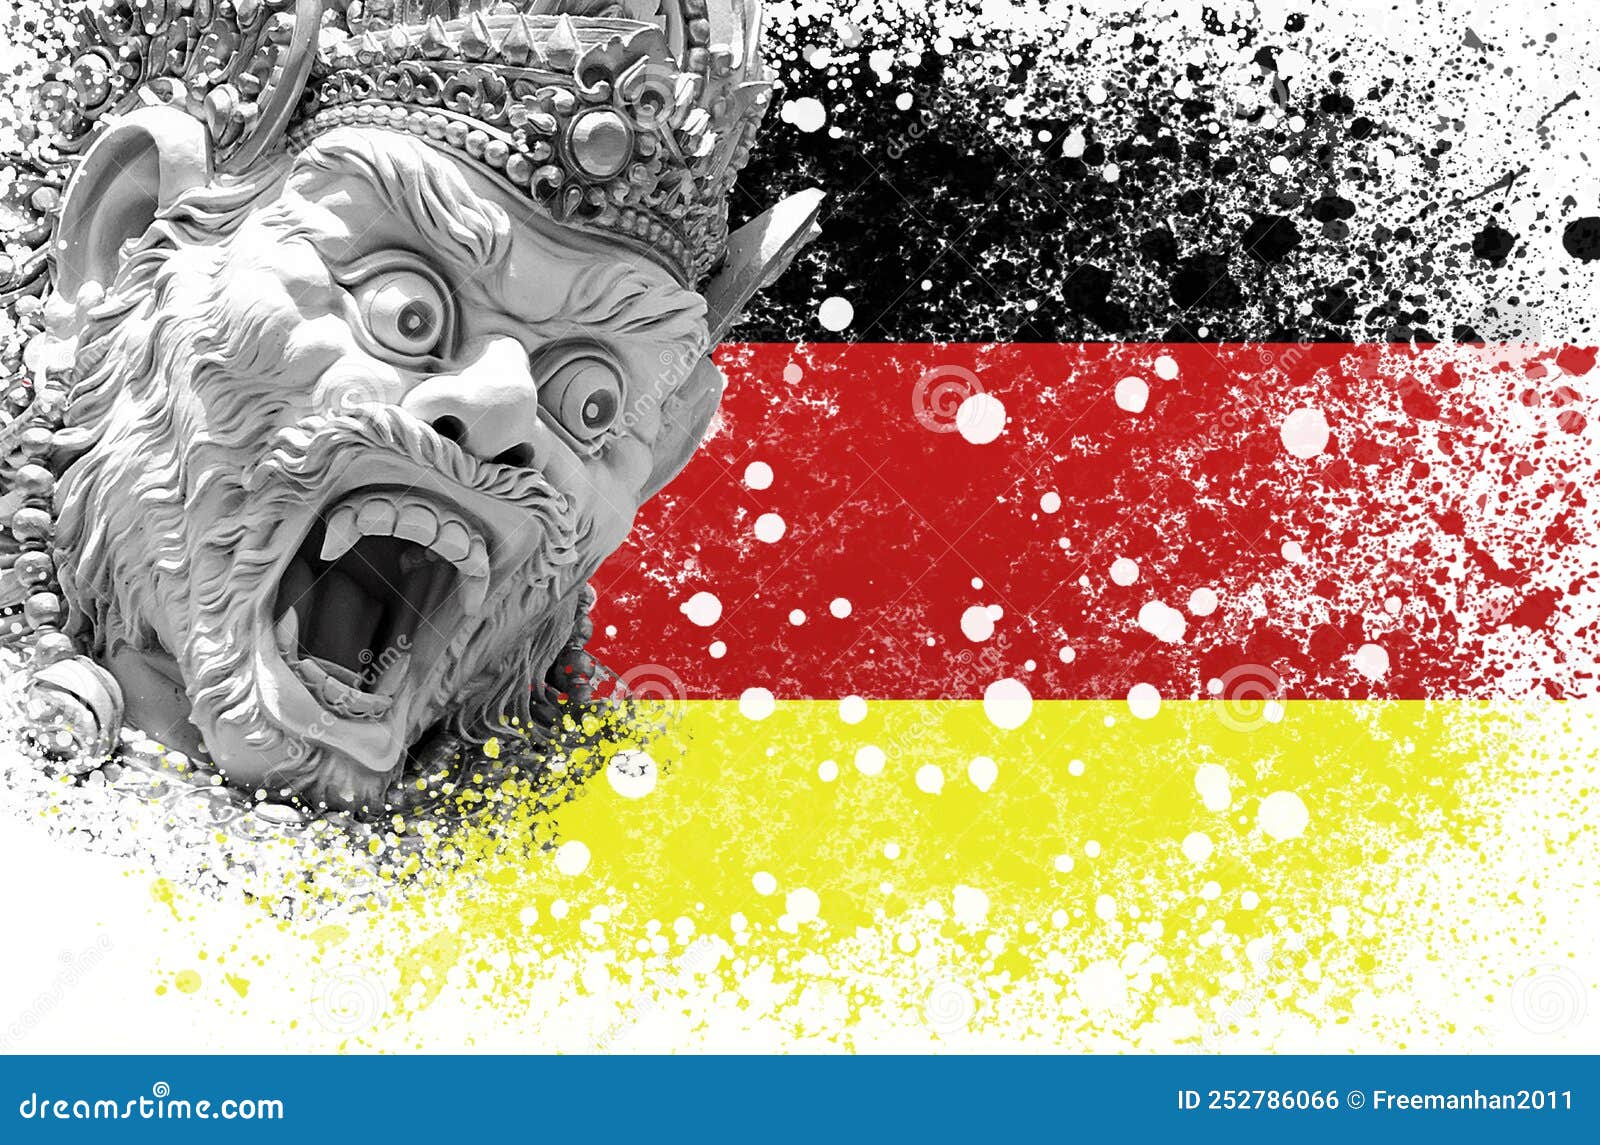 a new outbreak of viral infection at germany, monkey pox. head of statue god monkey hanuman at german flag background